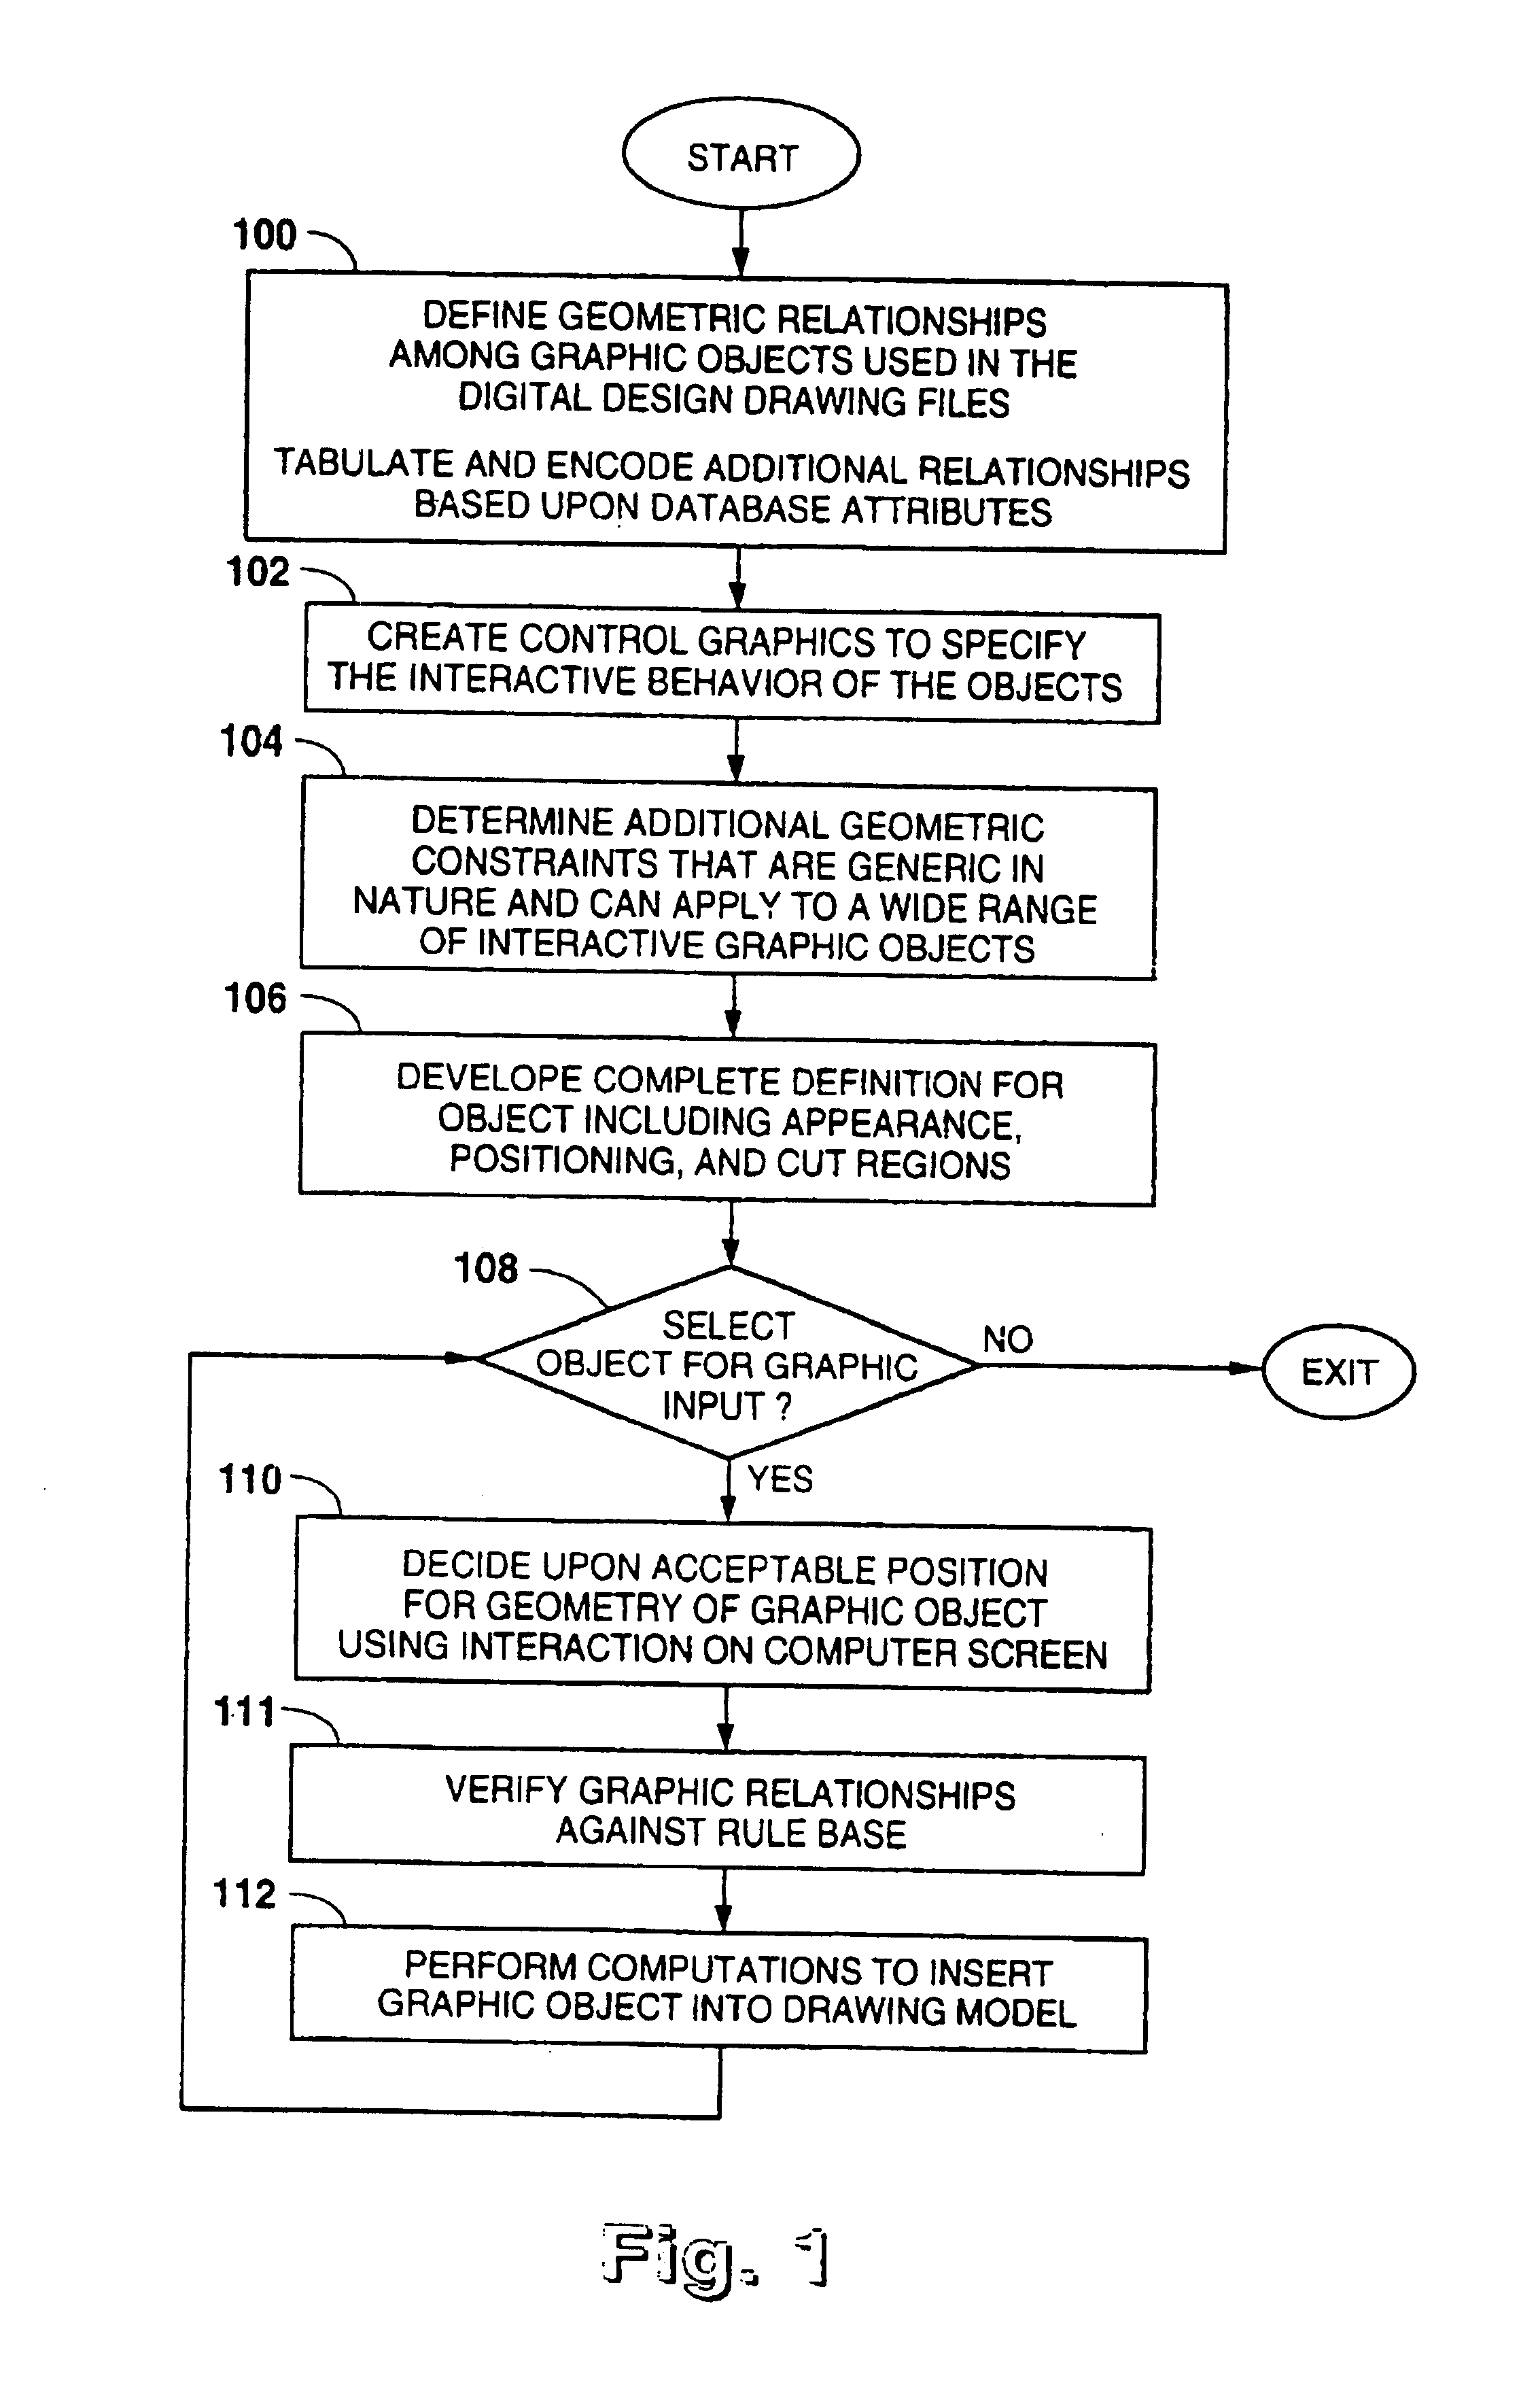 Method and apparatus for interactively manipulating and displaying presumptive relationships between graphic objects